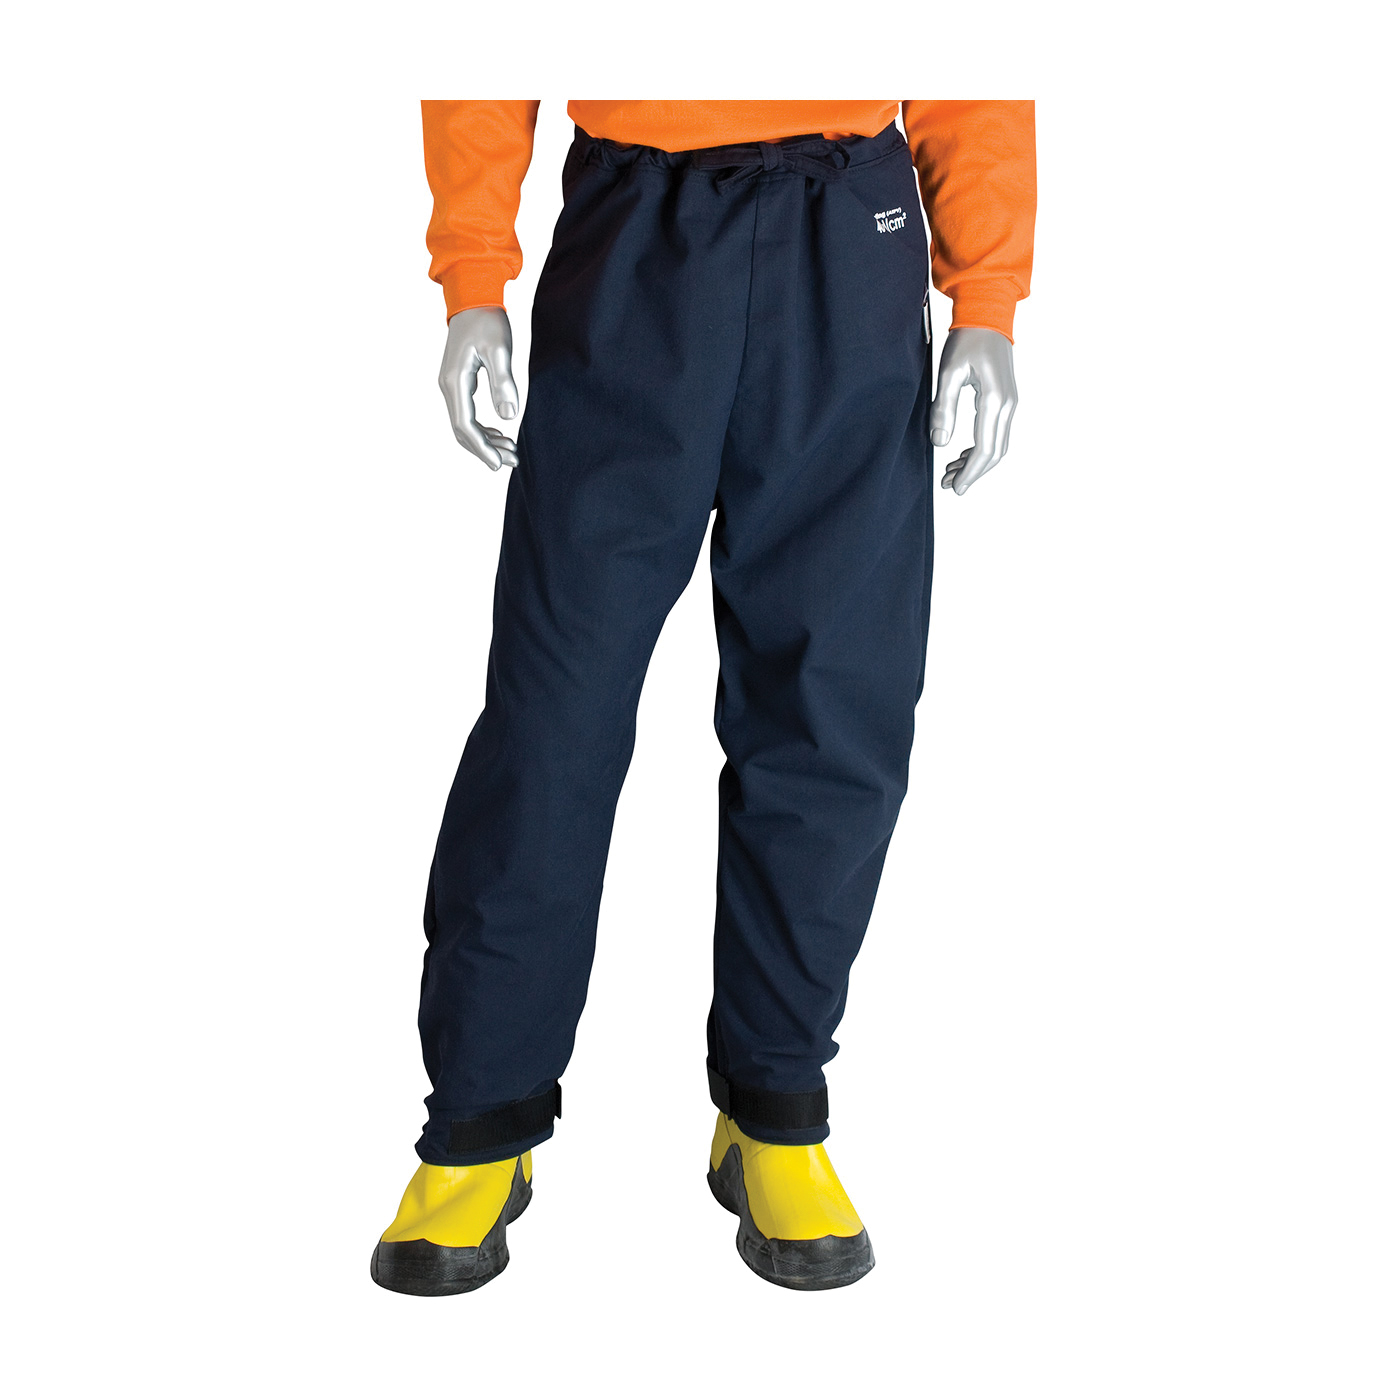 PIP® 9100-530ULT/2X 9100-530ULT Ultralight Flame Resistant Pant, 48 to 50 in Waist, 32 in L Inseam, Navy Blue, DuPont™ Protera®/Westex® UltraSoft® Interlock Knit